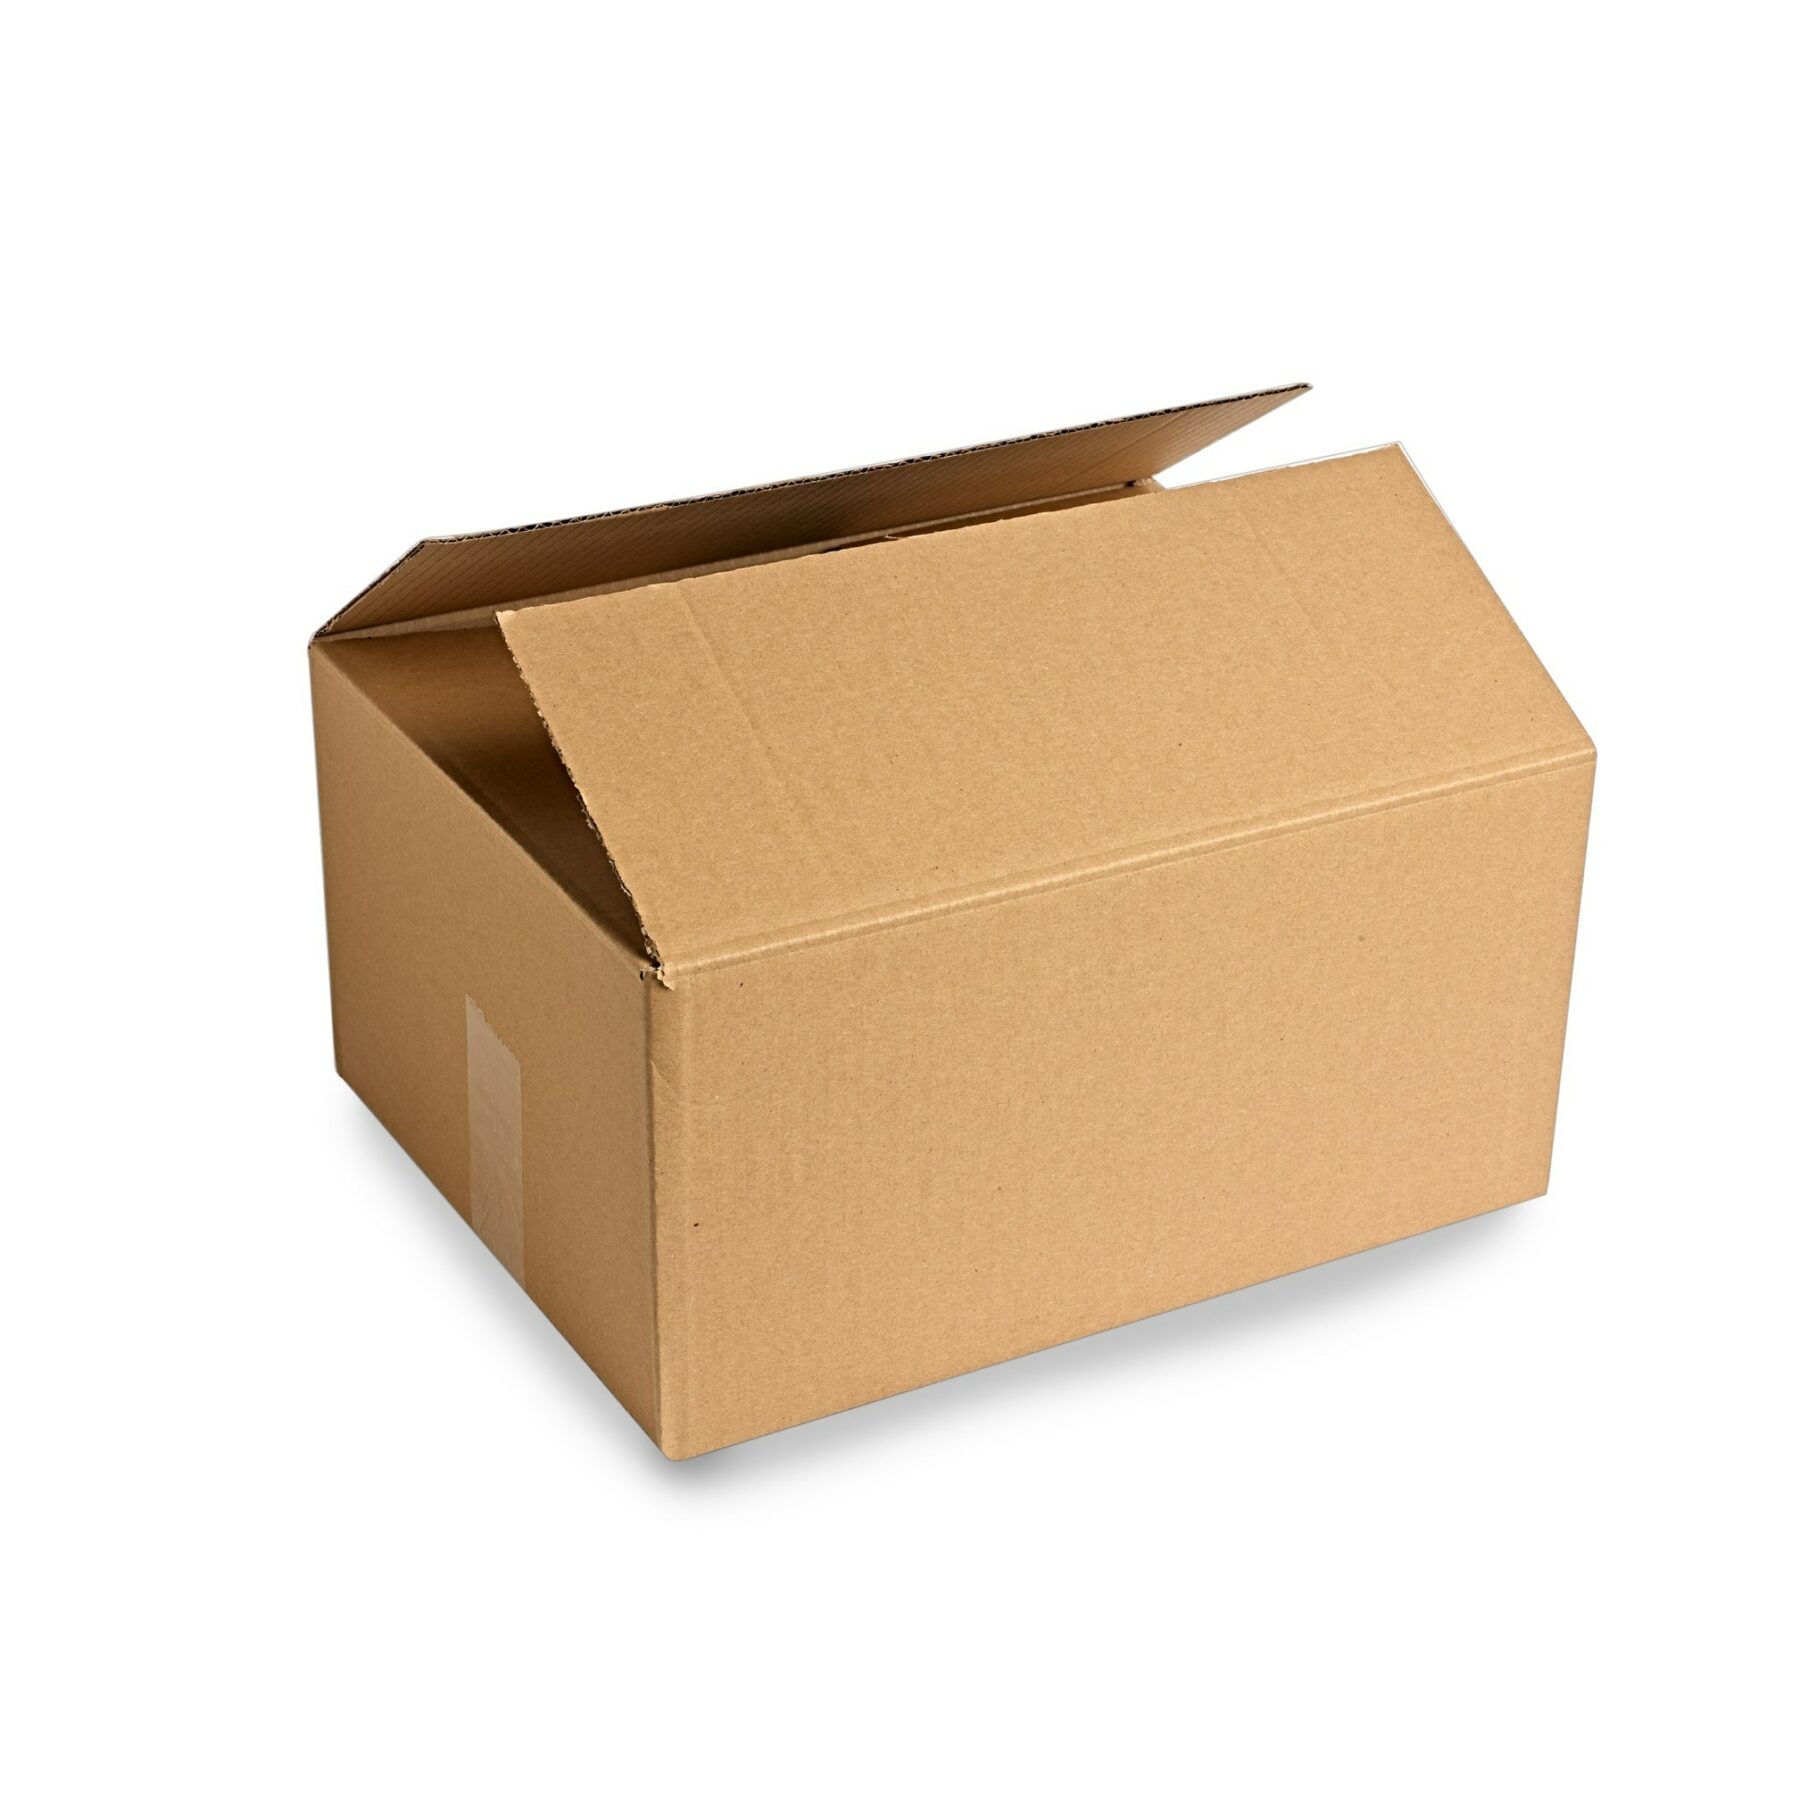 Cardboard Outer Box for sending packing and transiting